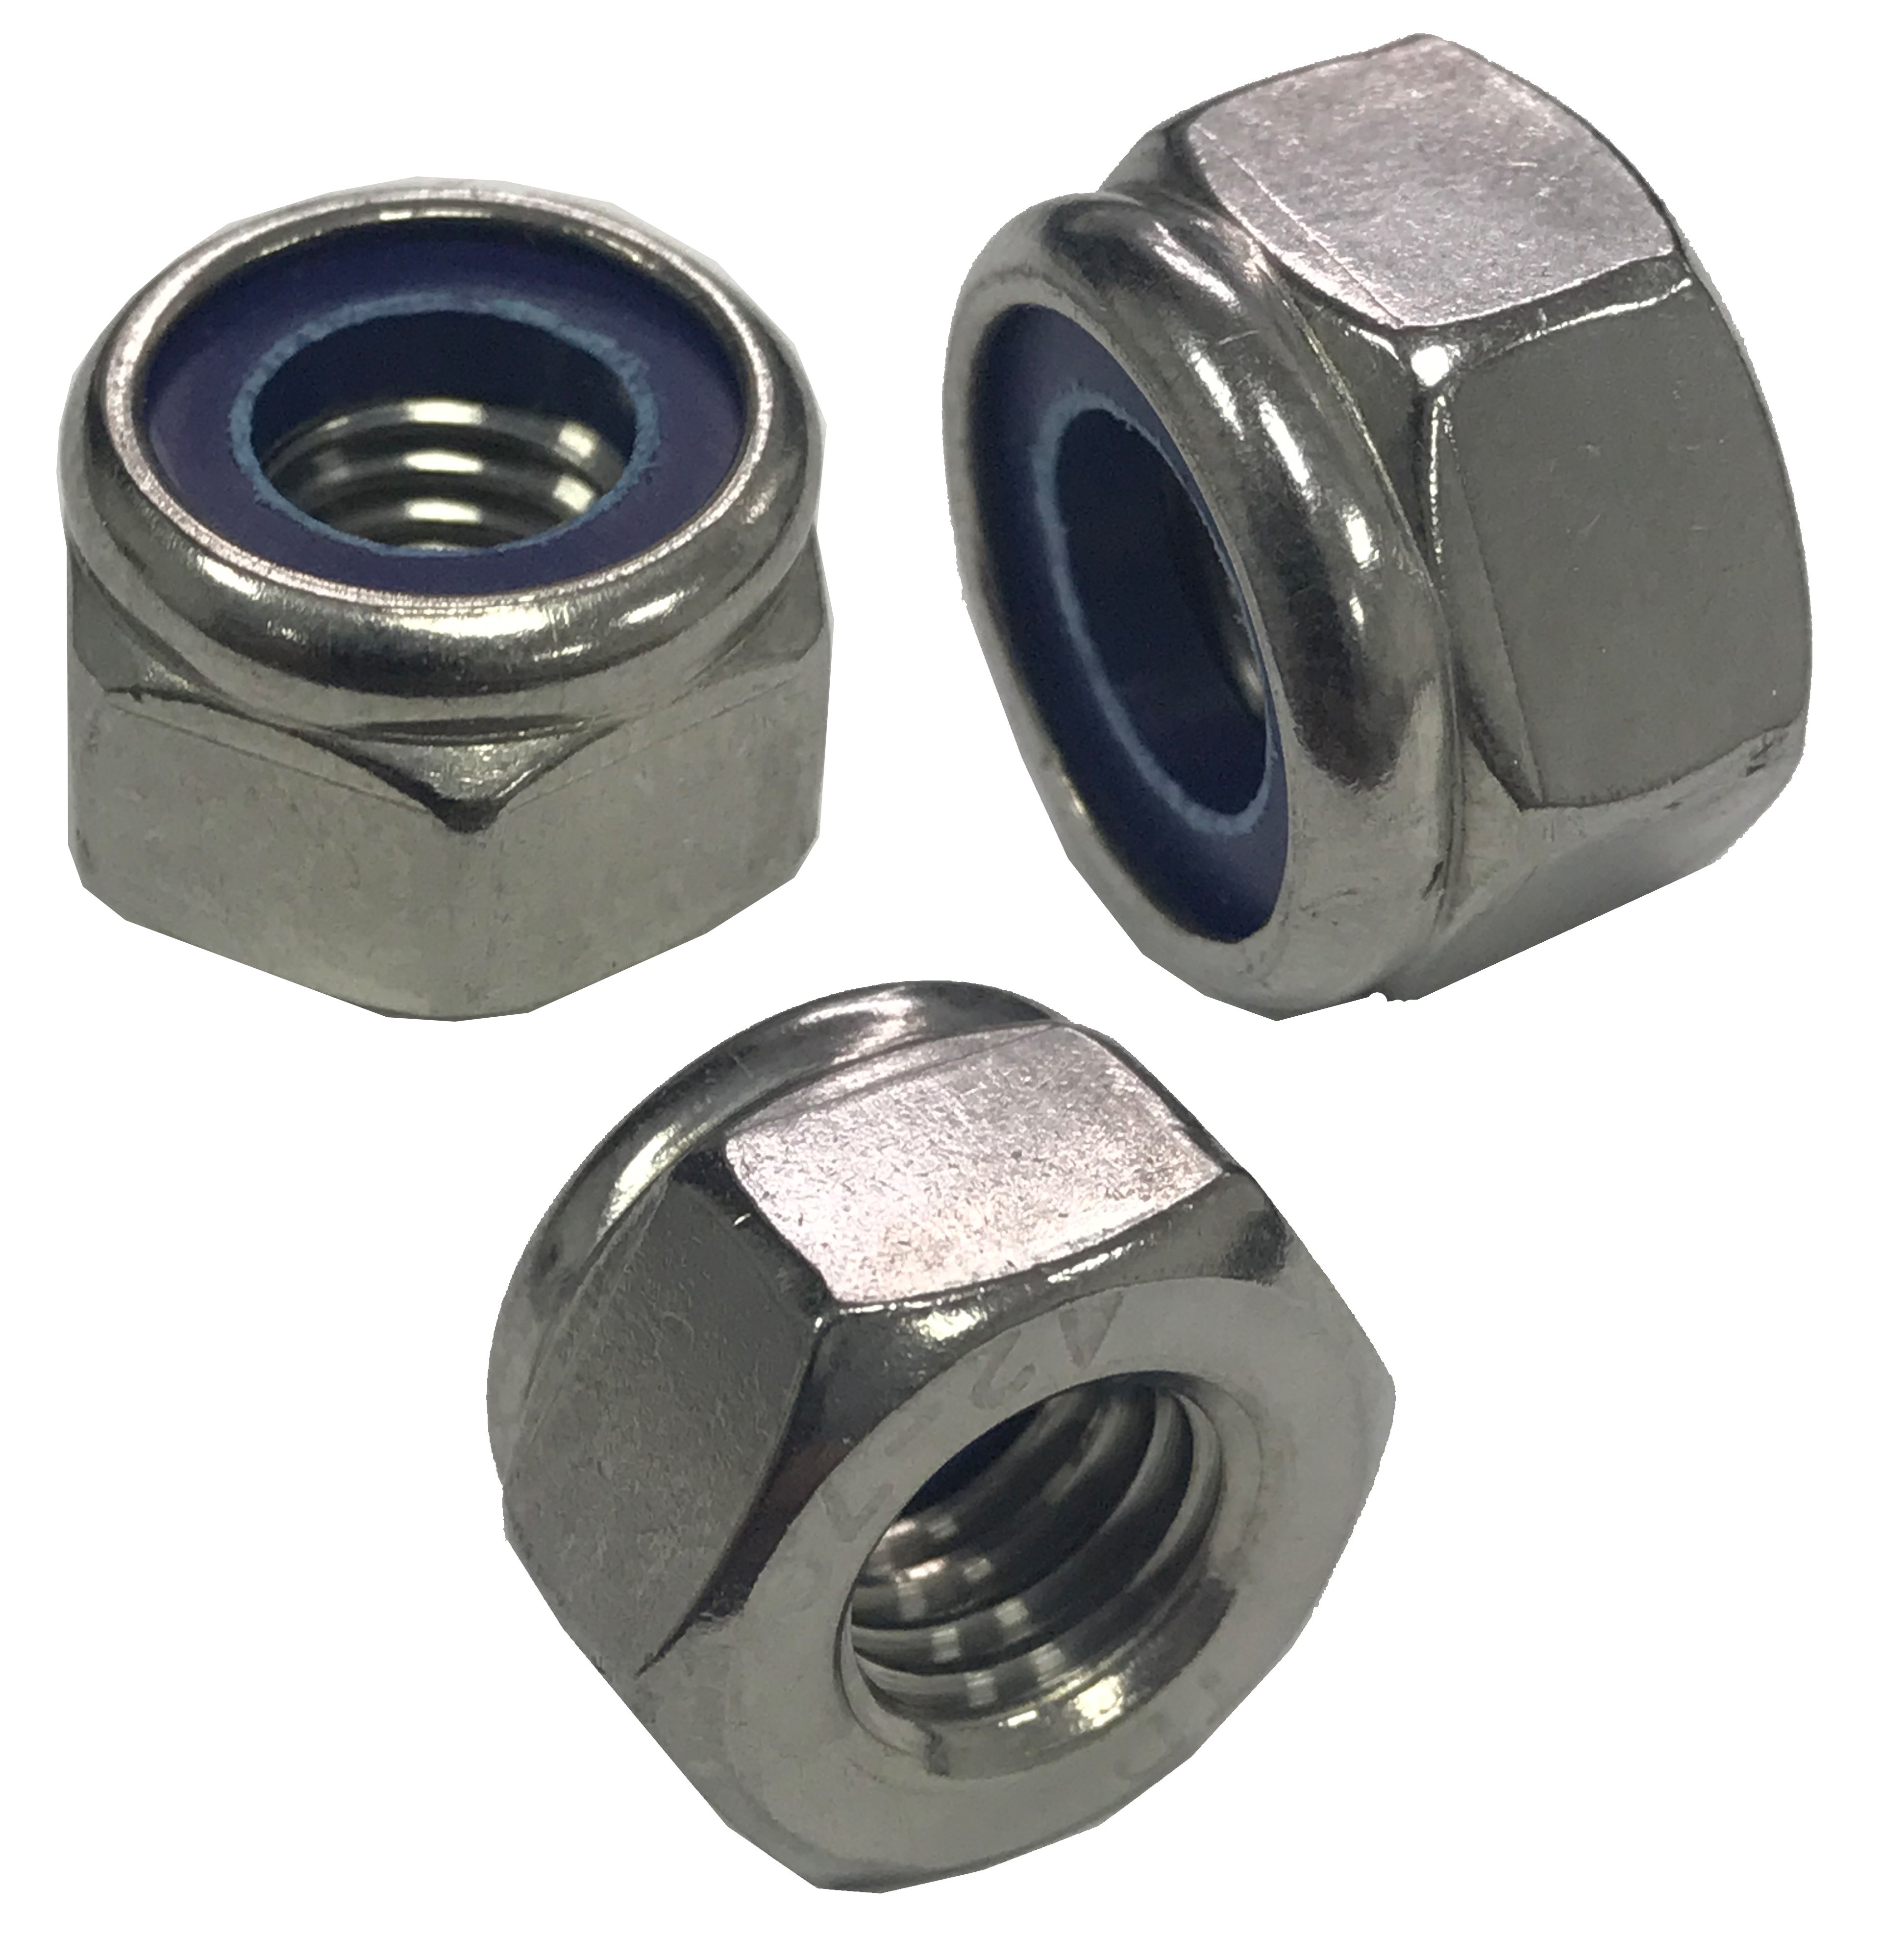 NYLOC NYLOCK NUTS M8 8mm A4 MARINE GRADE STAINLESS STEEL Pack 10 20 